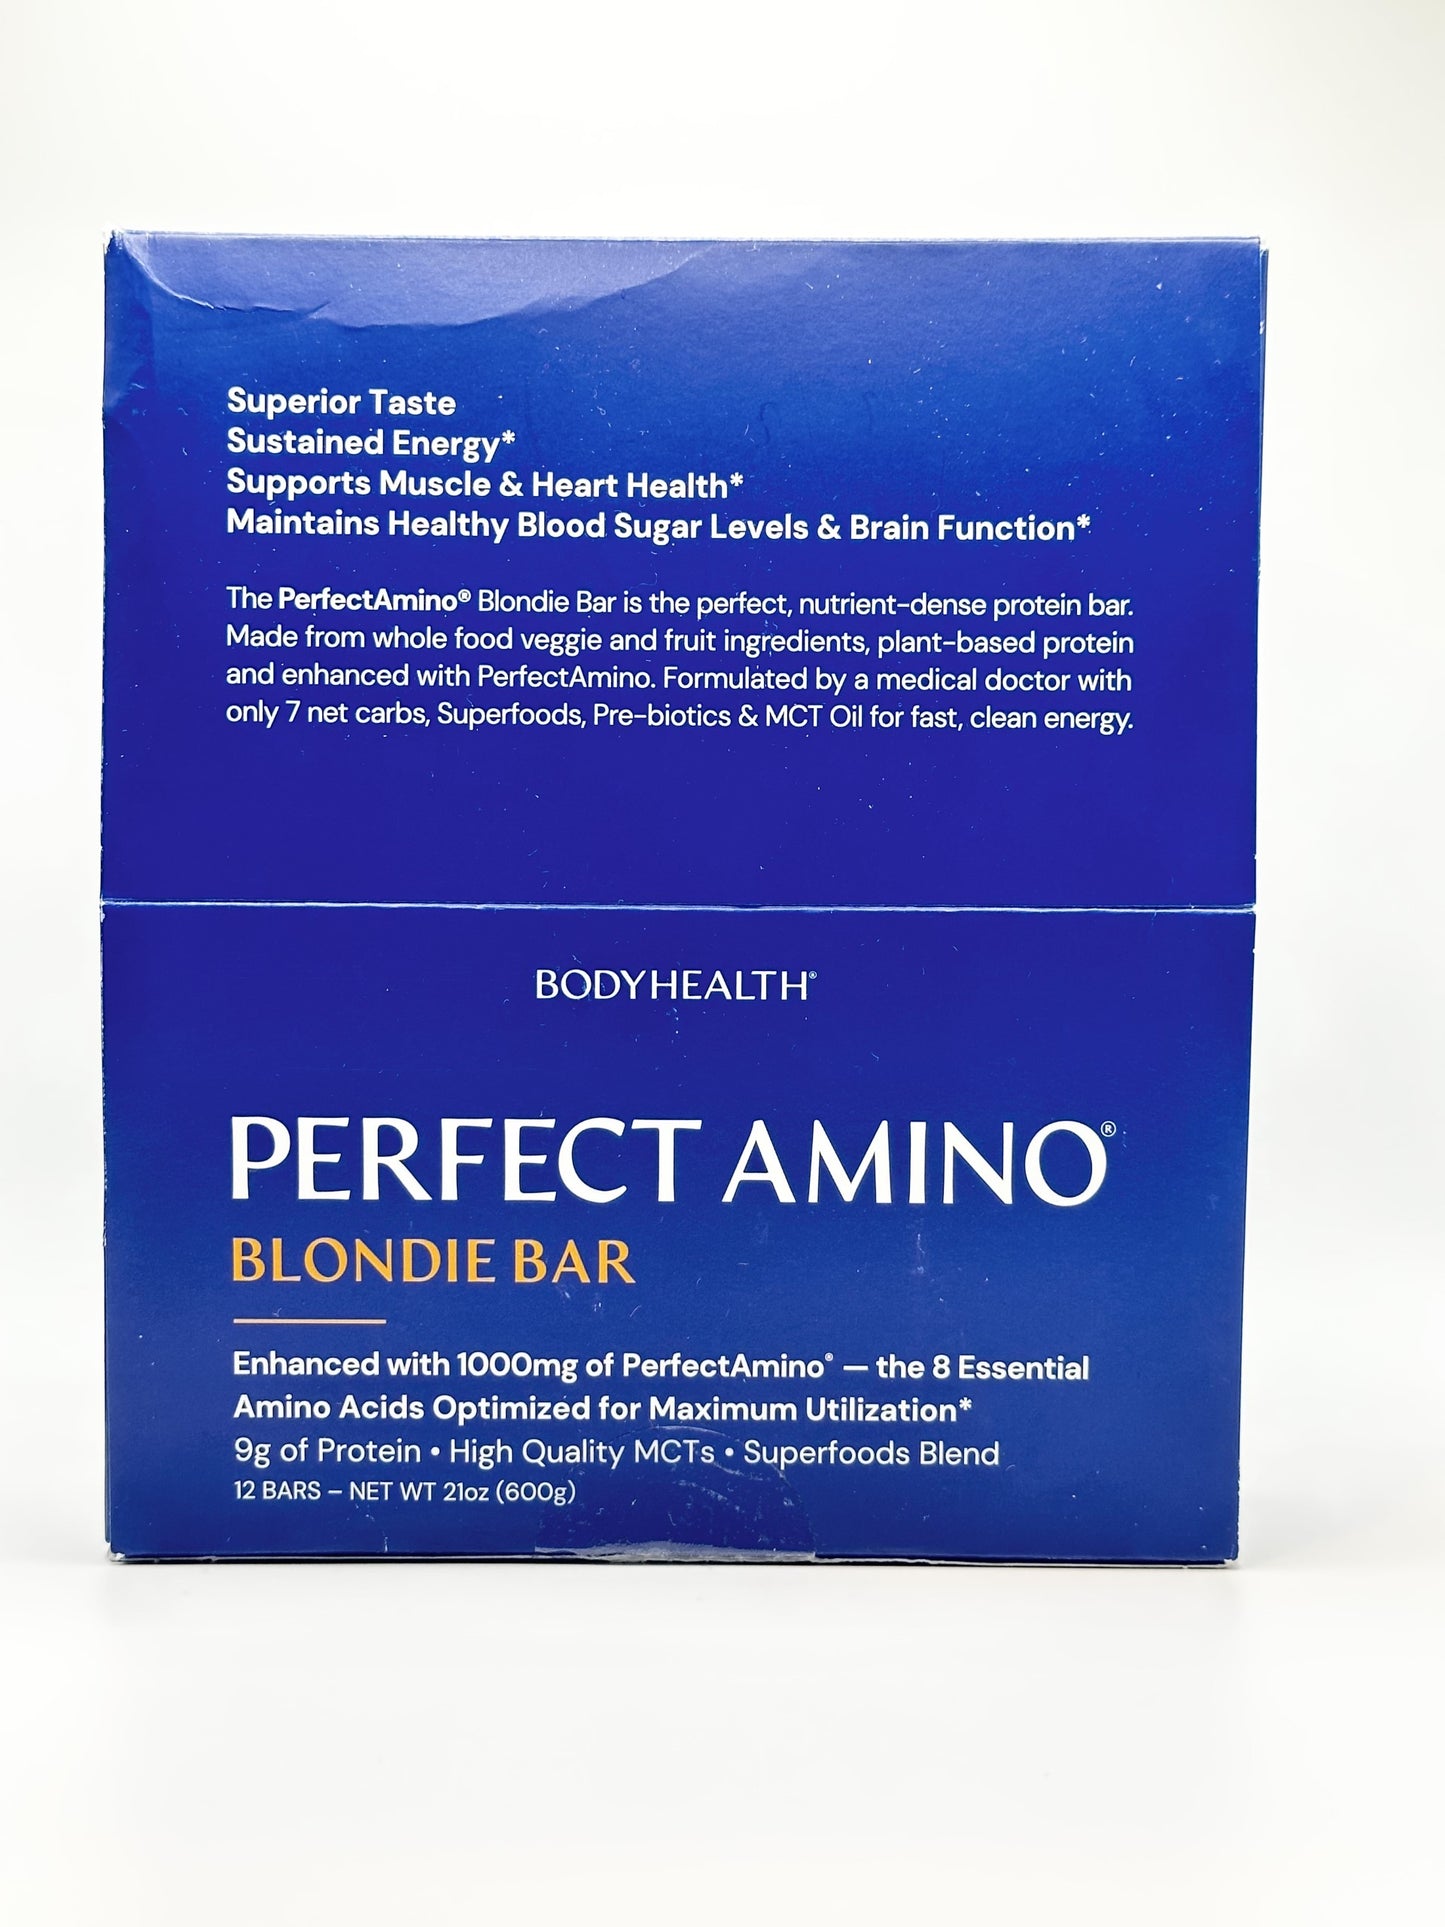 (Blondie Bar with Perfect Aminos) 1 bar